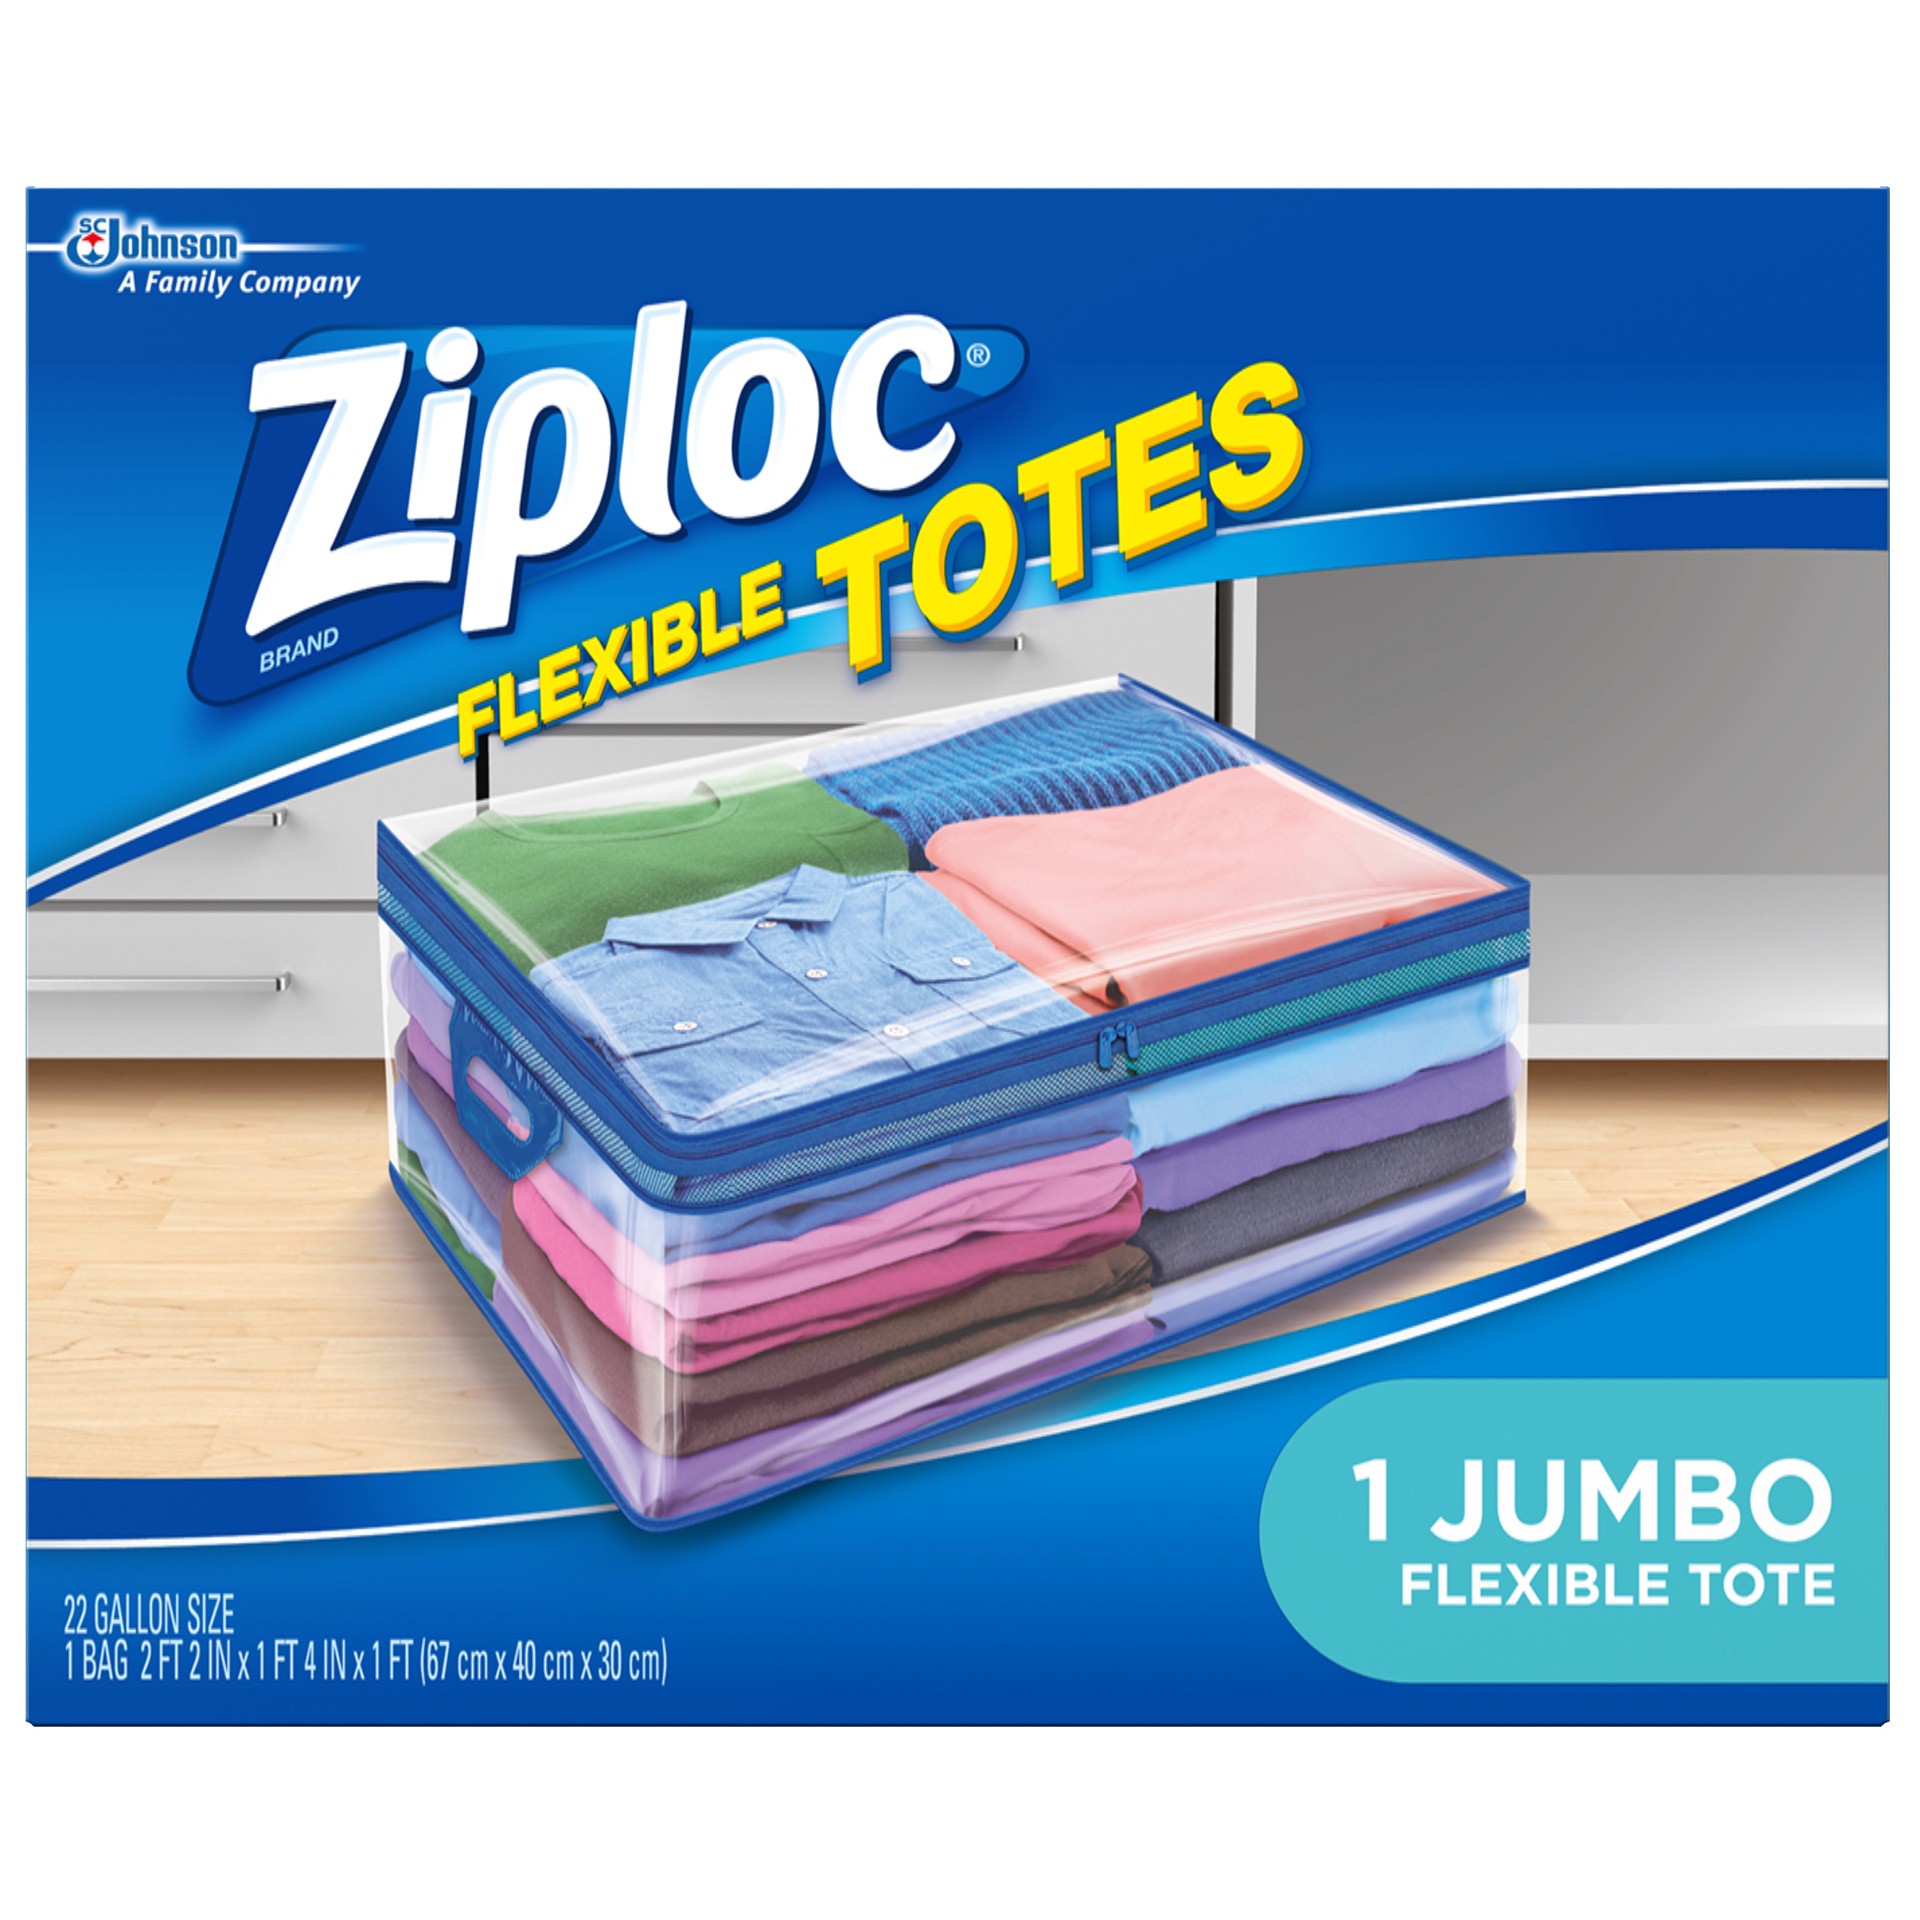 slide 1 of 1, Ziploc Flexible Totes, Jumbo, 1 CT, Easy-Close Zipper, Soft-Sided, Rectangular Bags, Built-In Handles, Thick Semi-Transparent Plastic, Flexible to Fit Where You Want Them, 1 ct